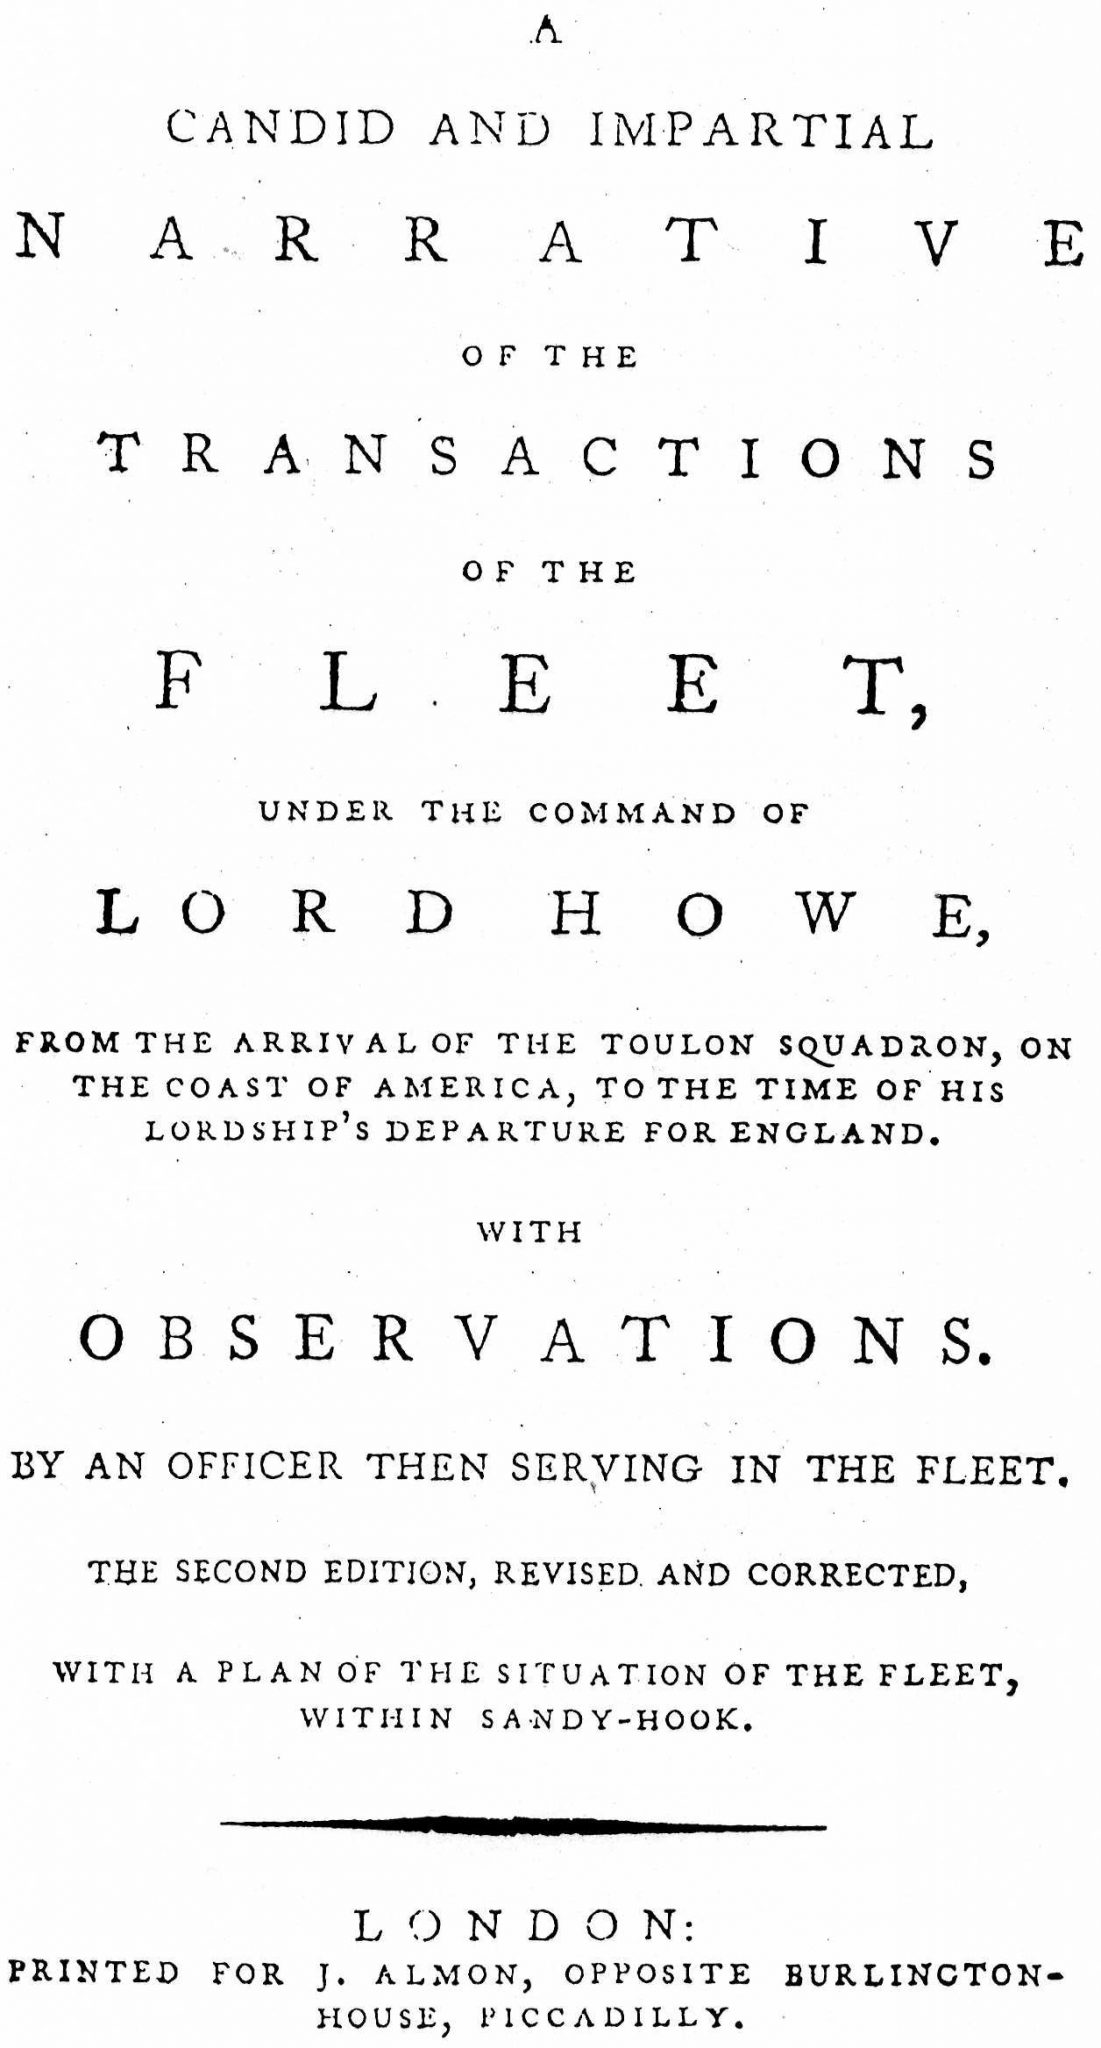 A Narrative of the Operations of the Fleet, London, 1779